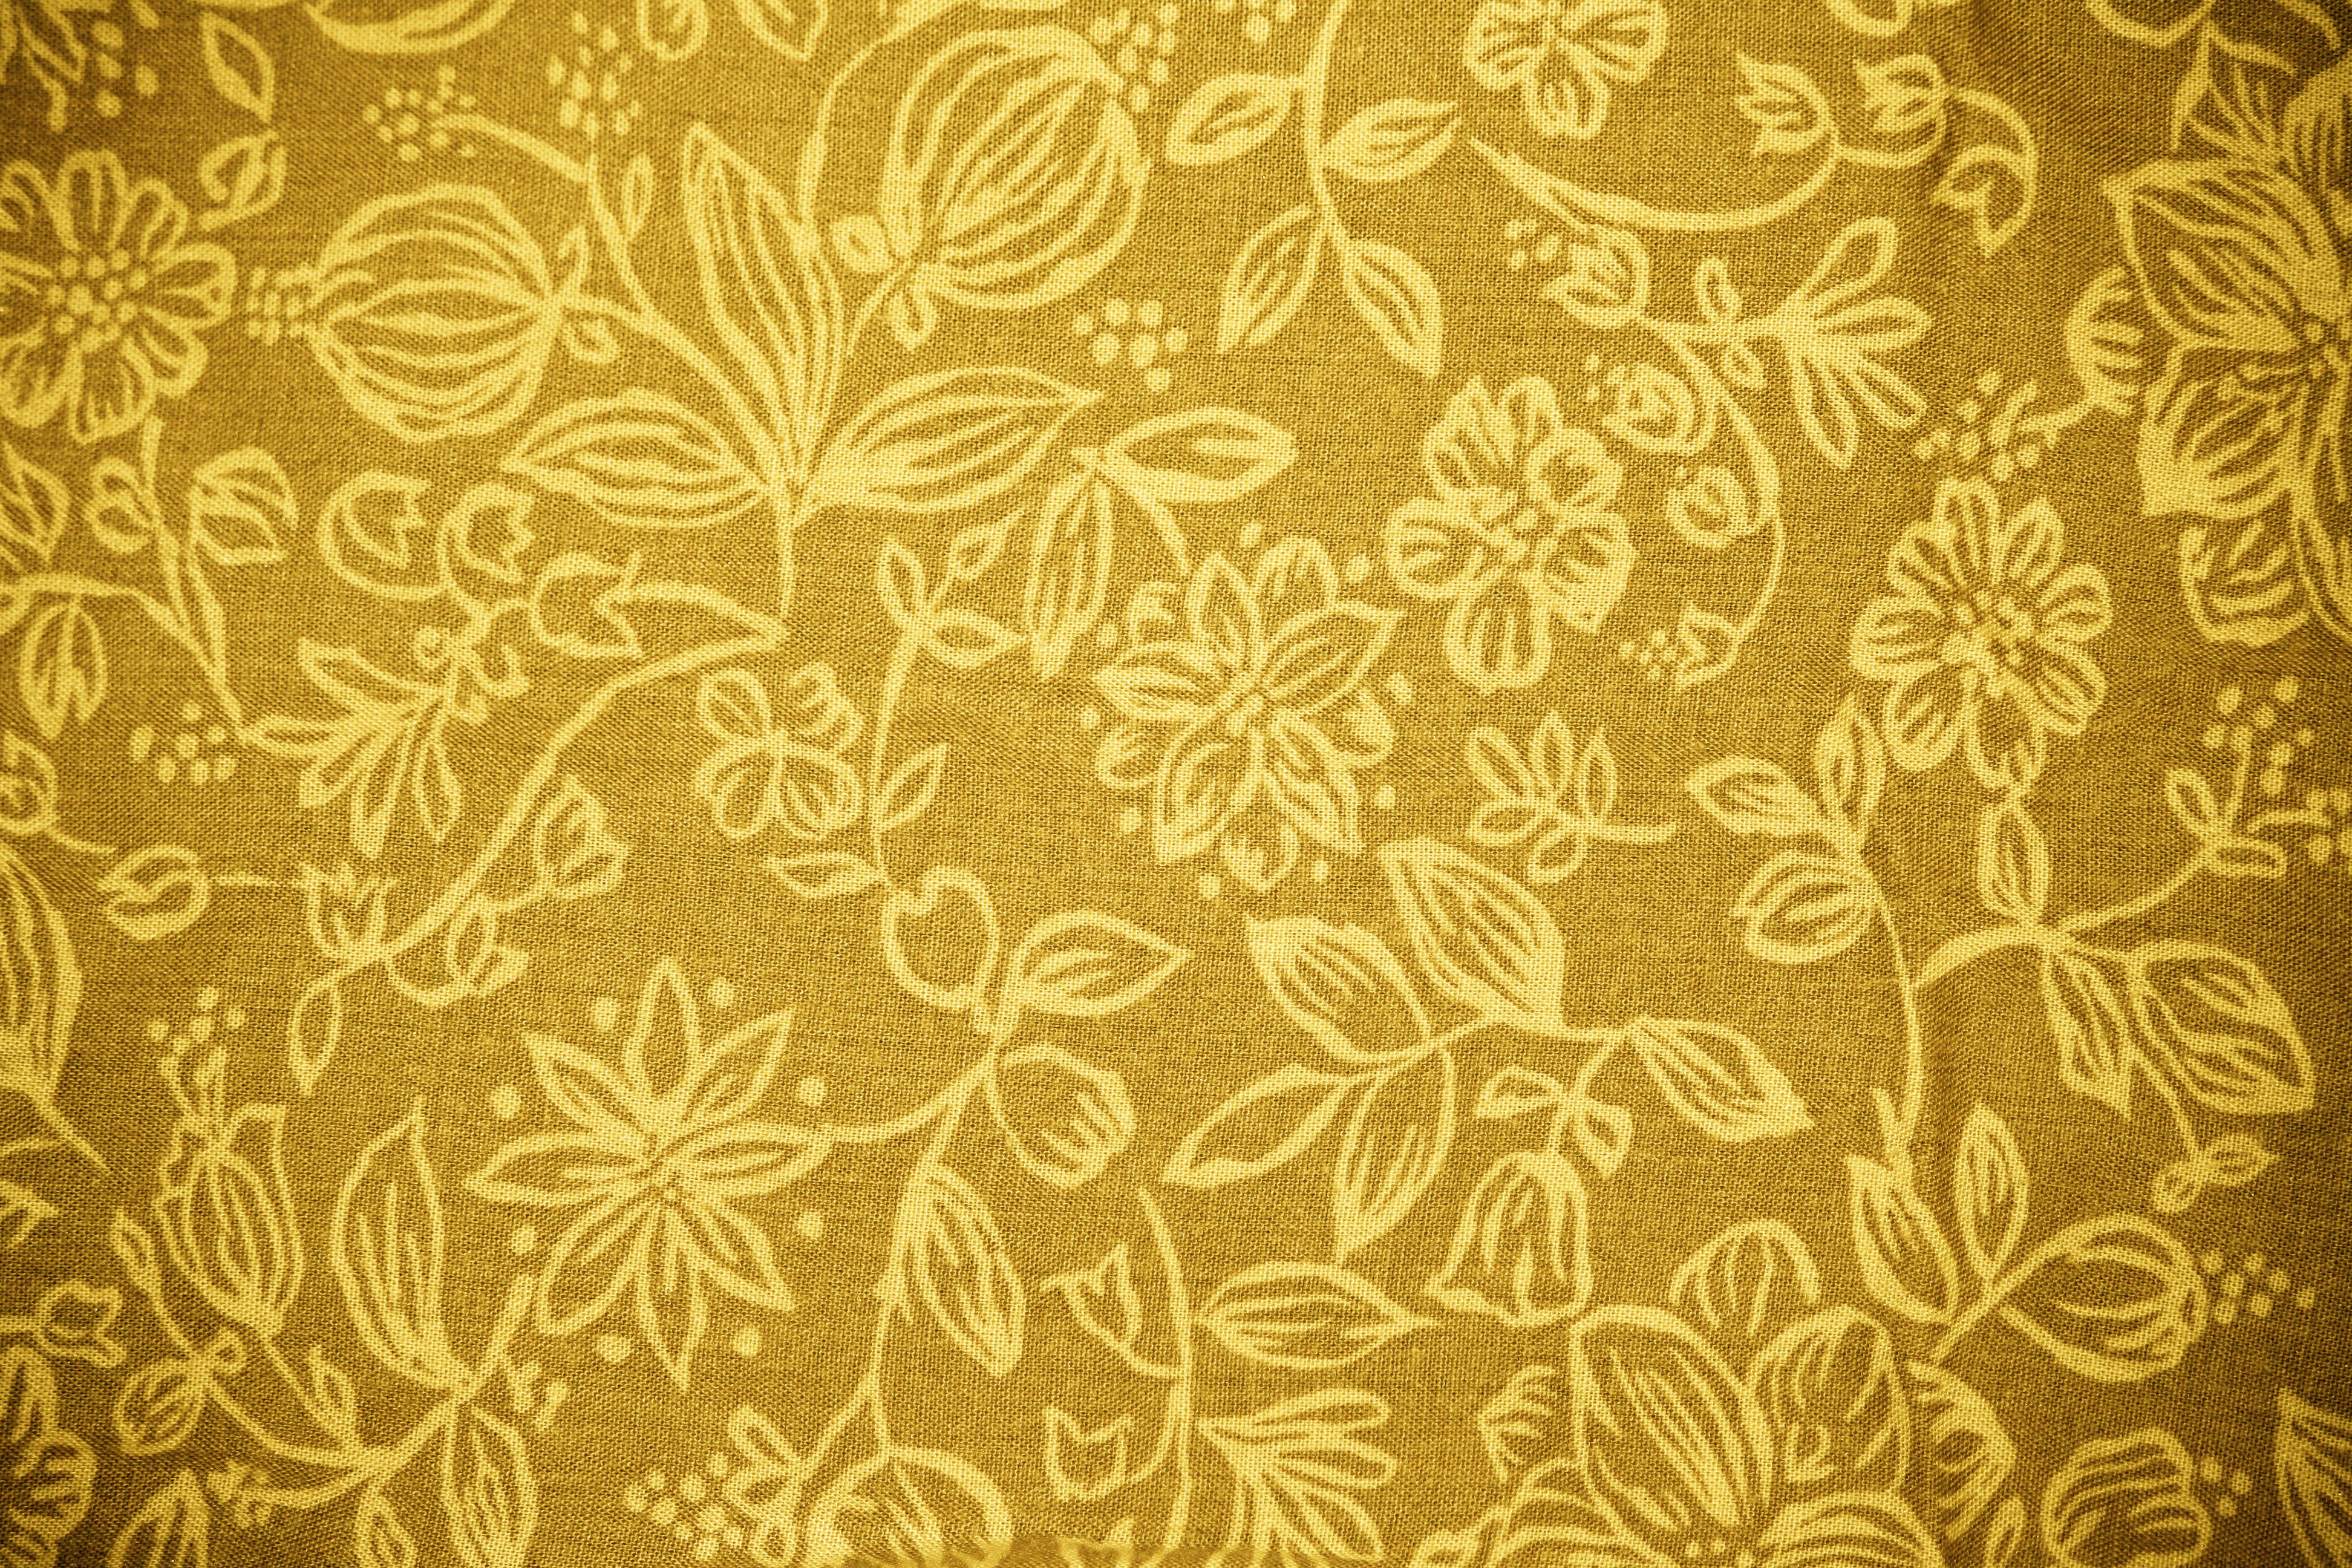 Gold Fabric with Floral Pattern Texture   High Resolution Photo 3888x2592